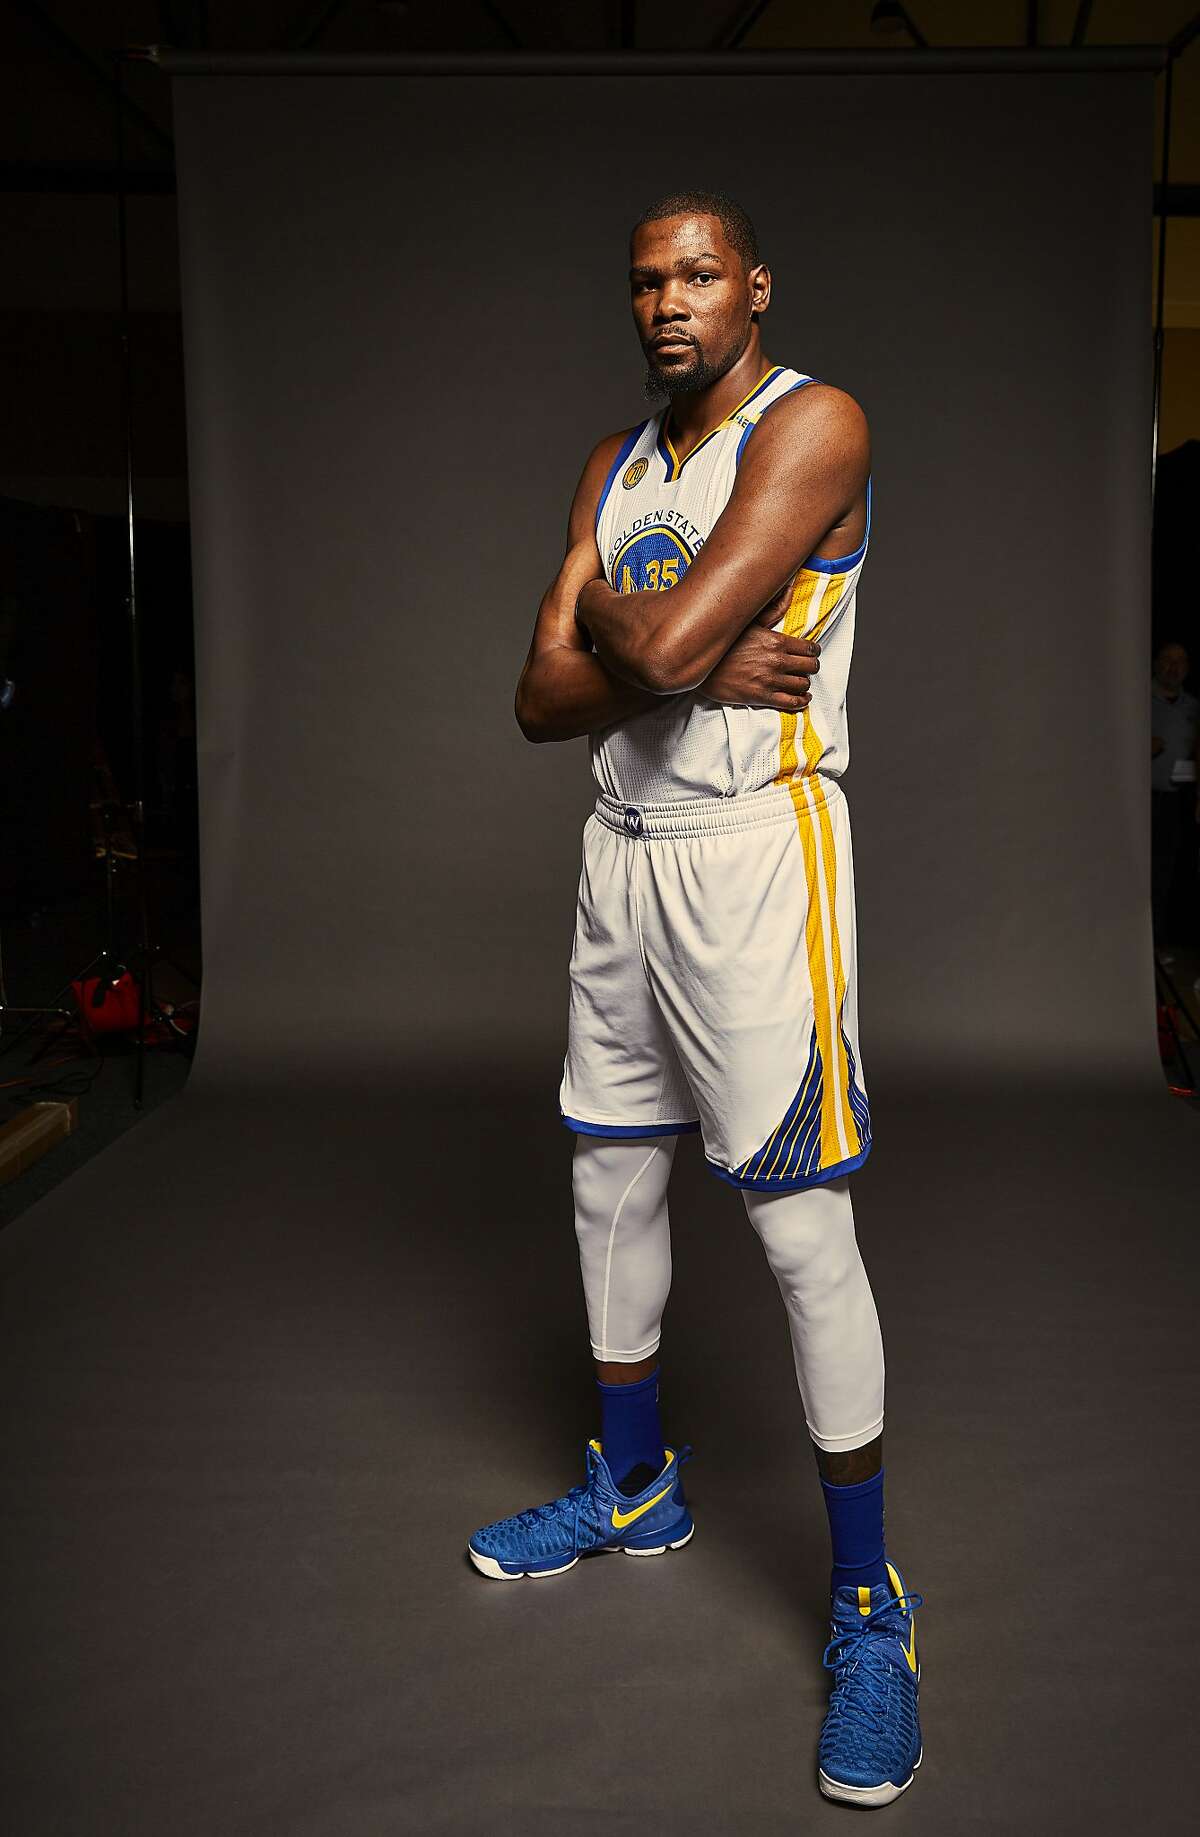 Golden State Warriors Forward Kevin Durant is seen during media day on Monday, Sept. 26, 2016 in Oakland, Calif.